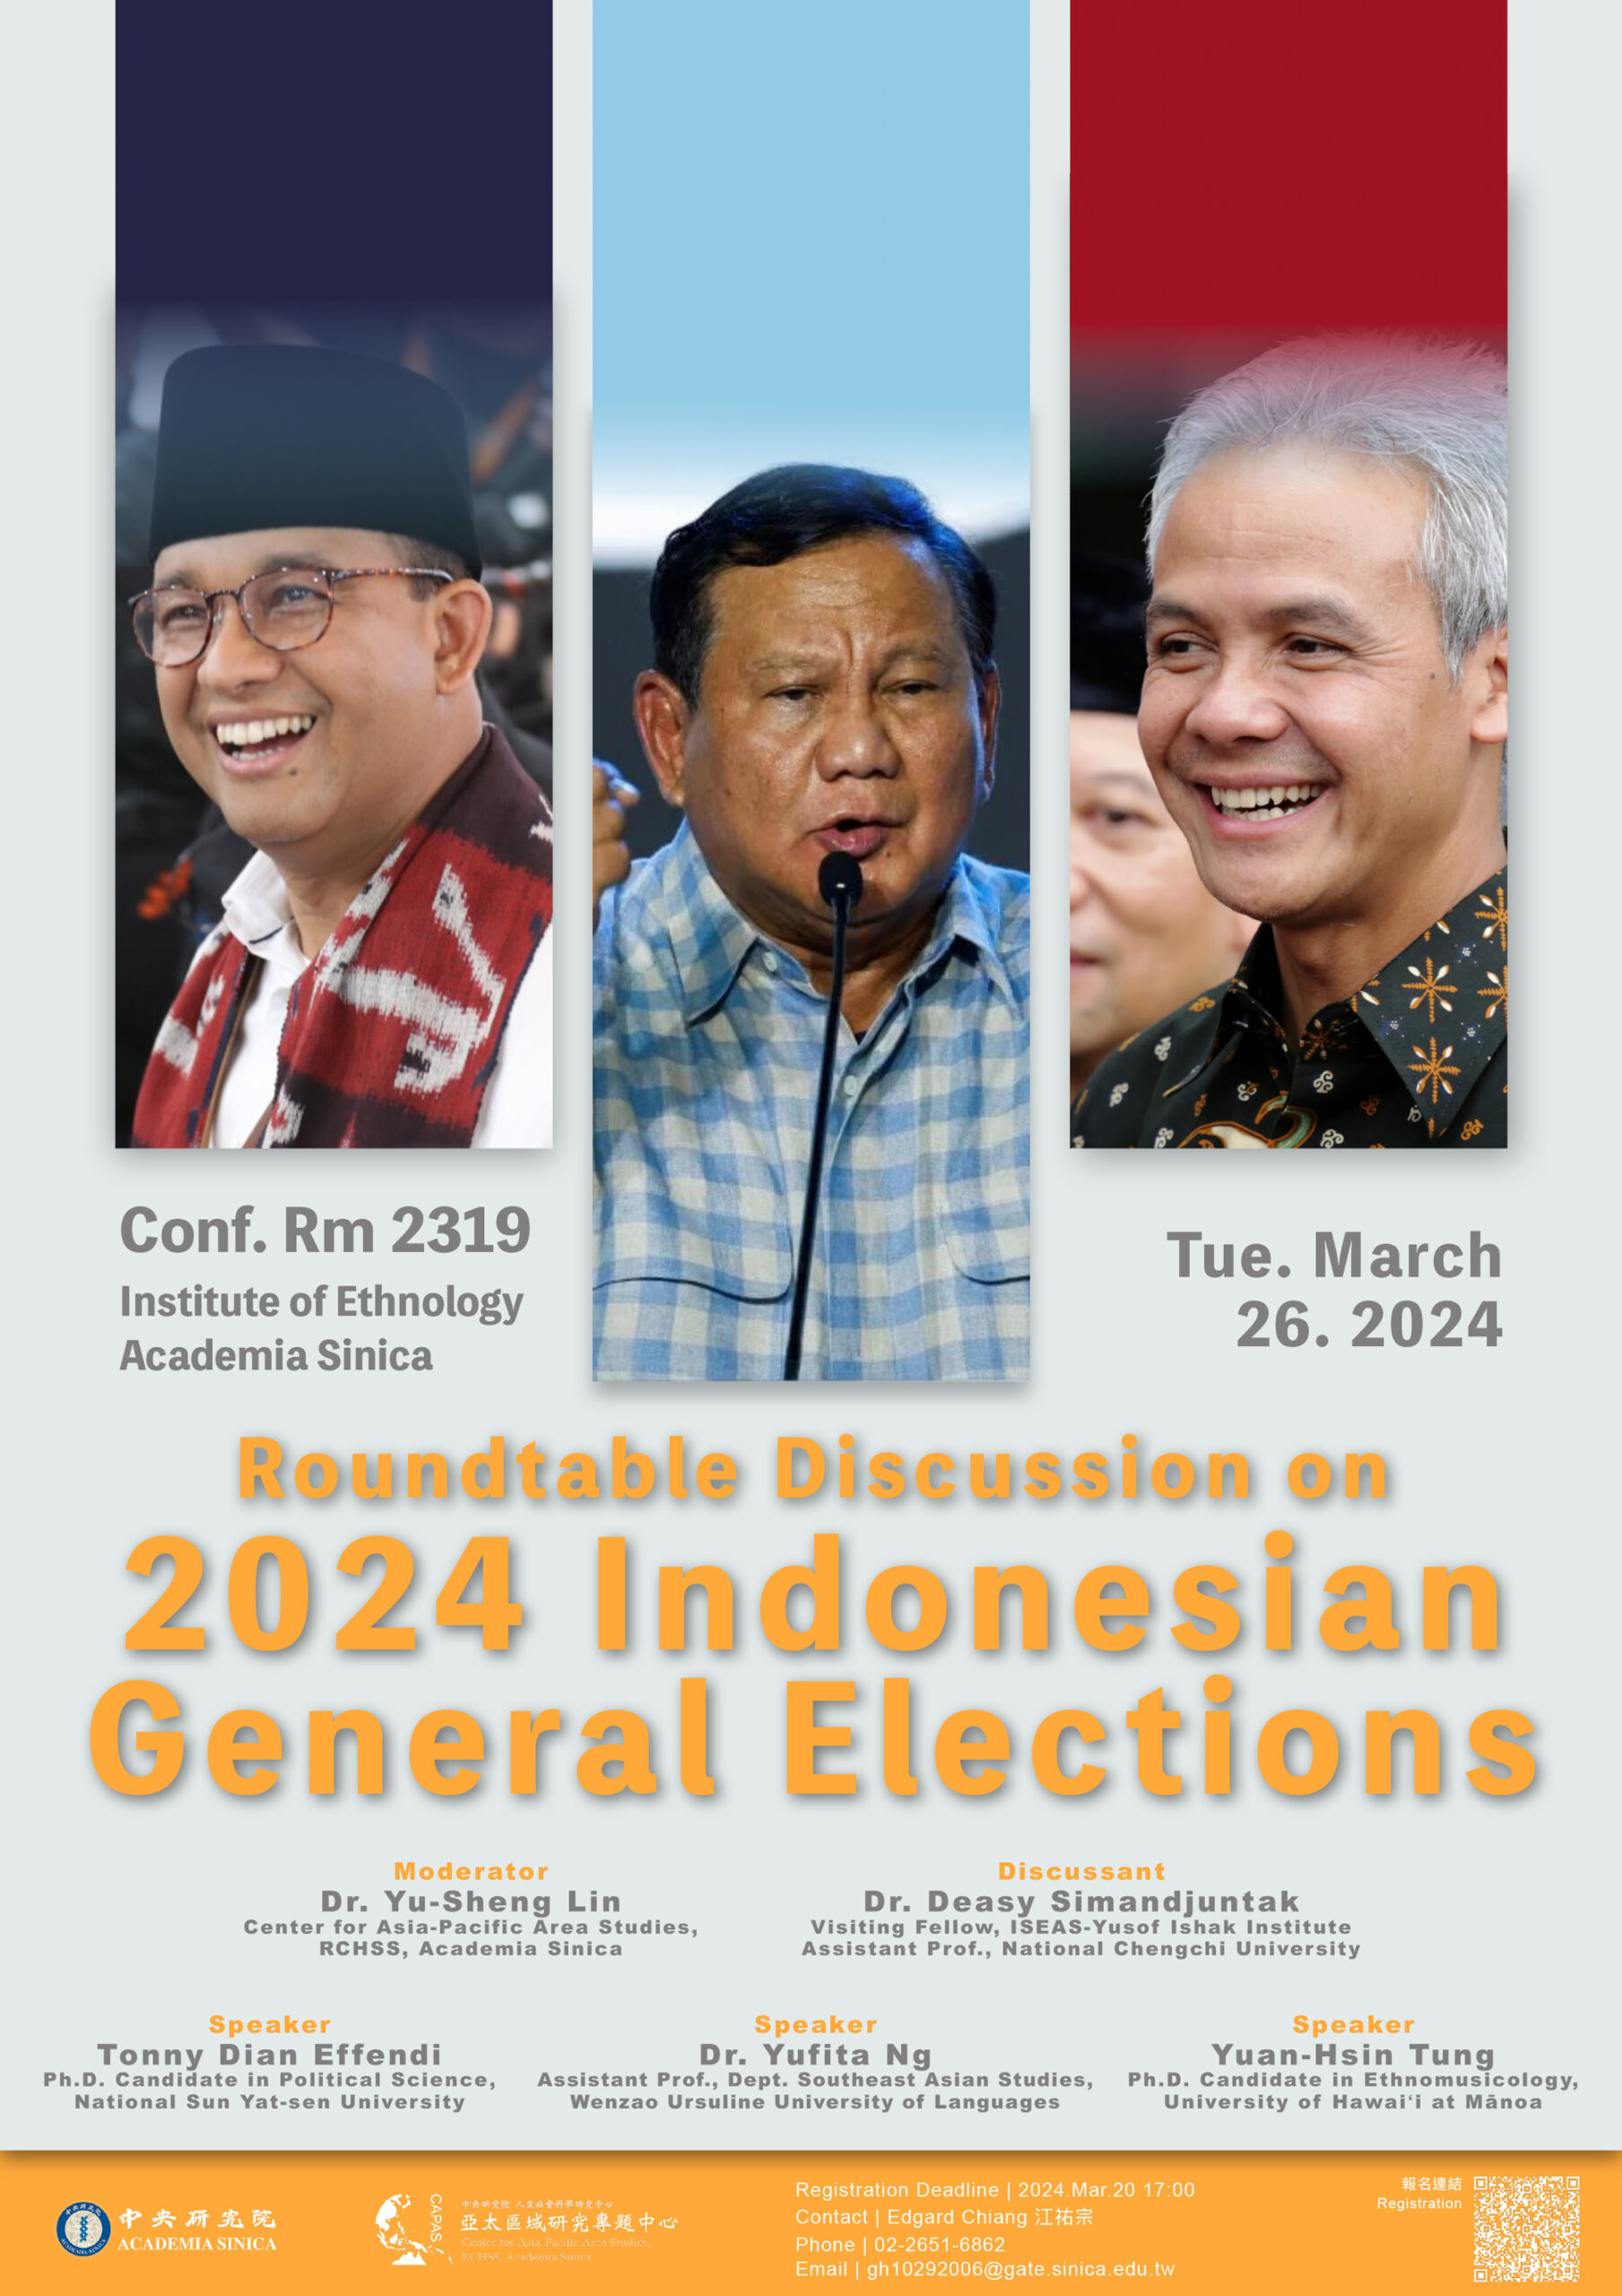 Roundtable Discussion on 2024 Indonesian General Election